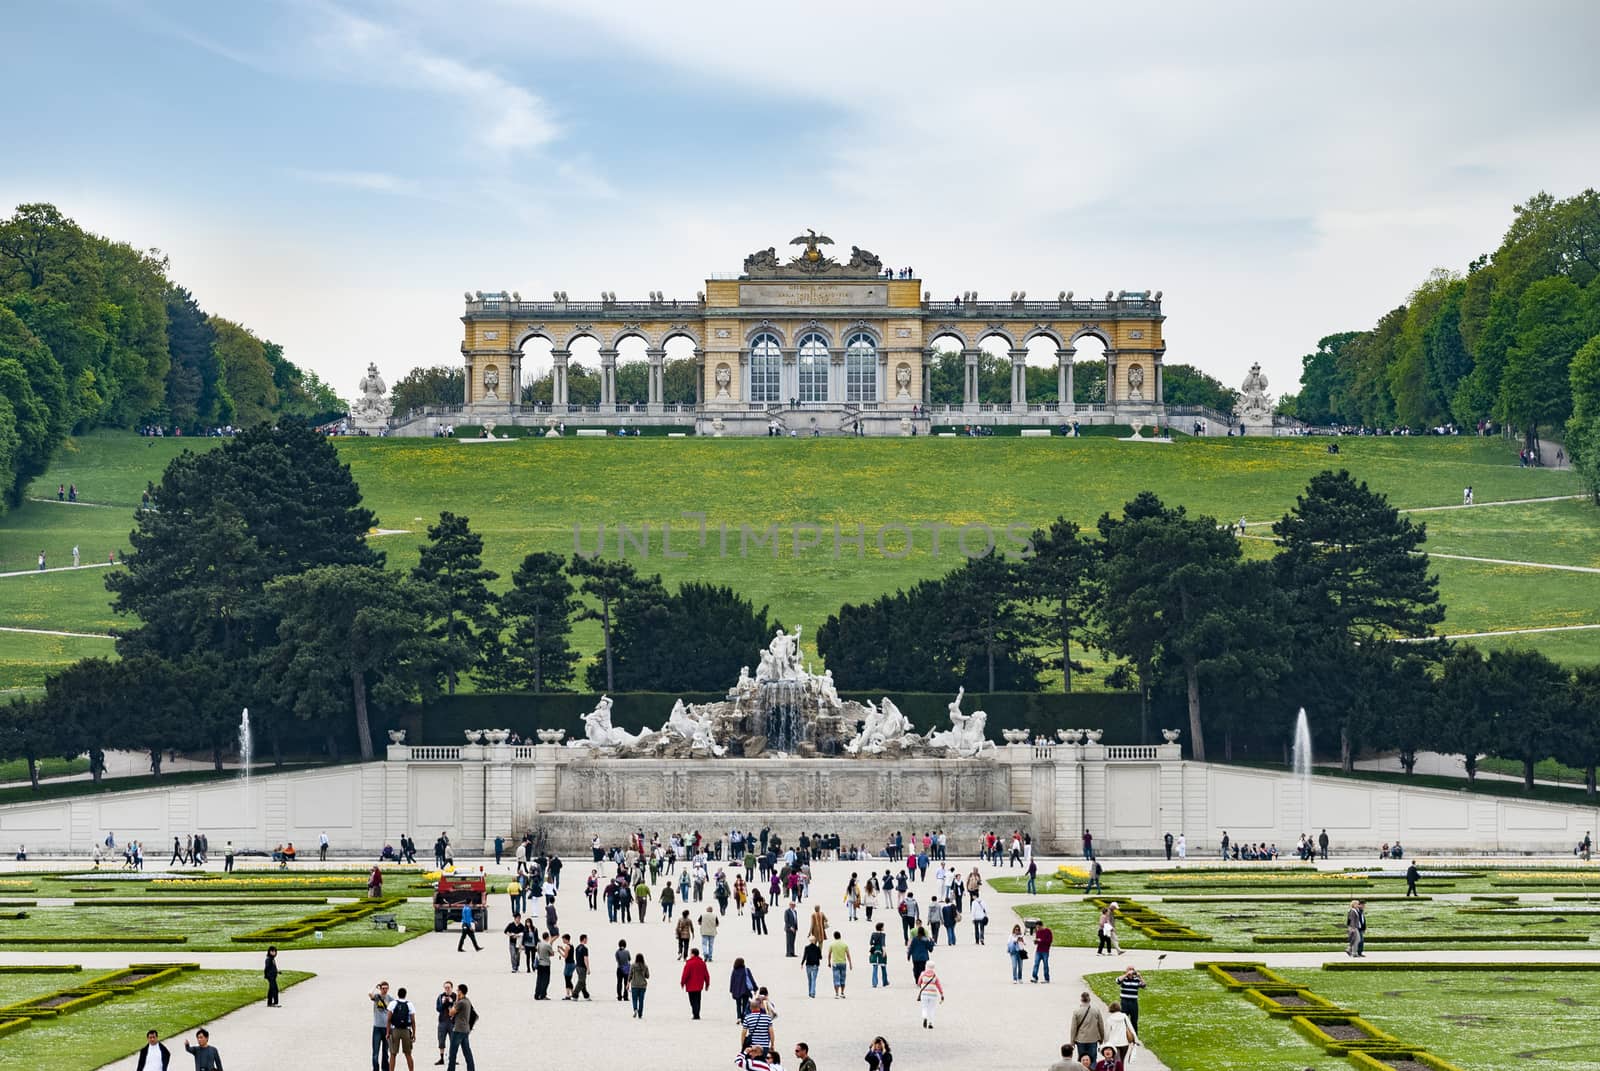 Vienna, Austria - April 28, 2011: The Gloriette was built in 1775 to glorify Habsburg power. It's located on the top of the hill in the Schoenbrunn Palace Garden, in Vienna, Austria.